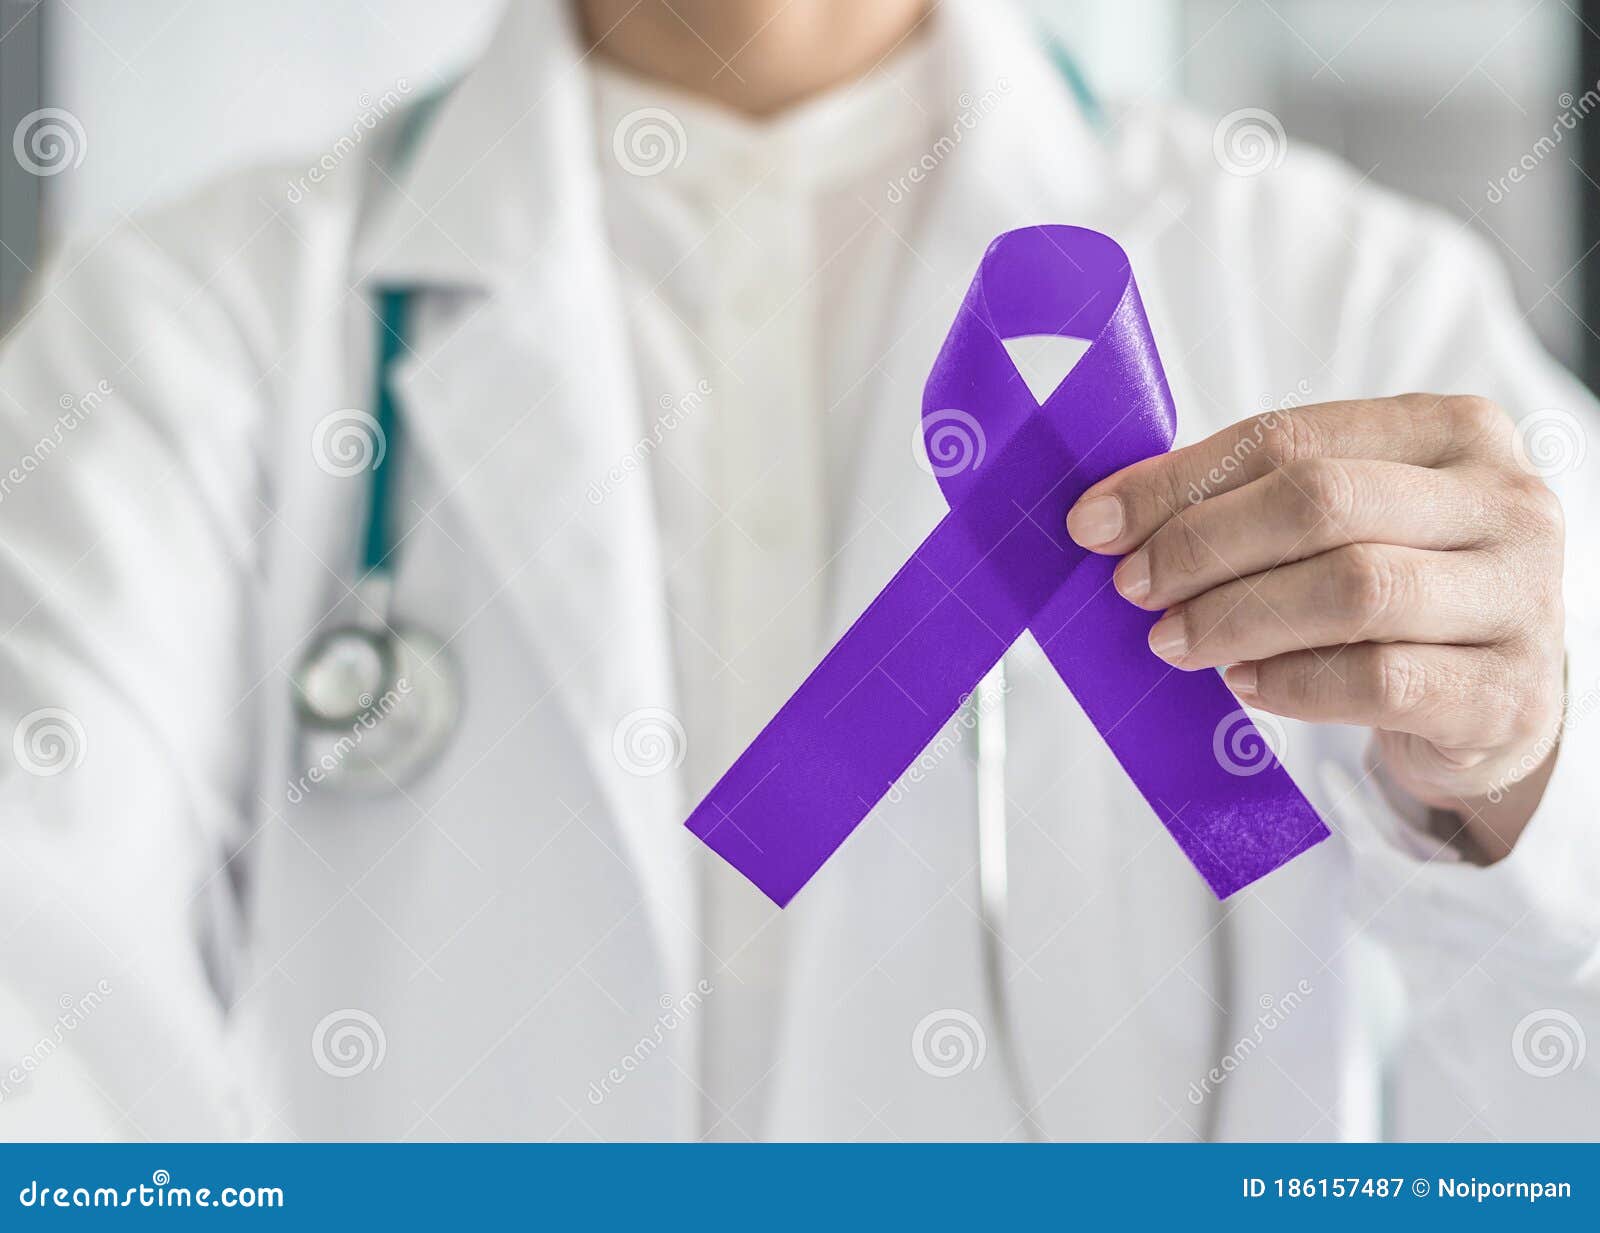 hodgkin`s lymphoma and testicular cancer awareness violet ribbon ic bow color on doctorÃ¢â¬â¢s hand support